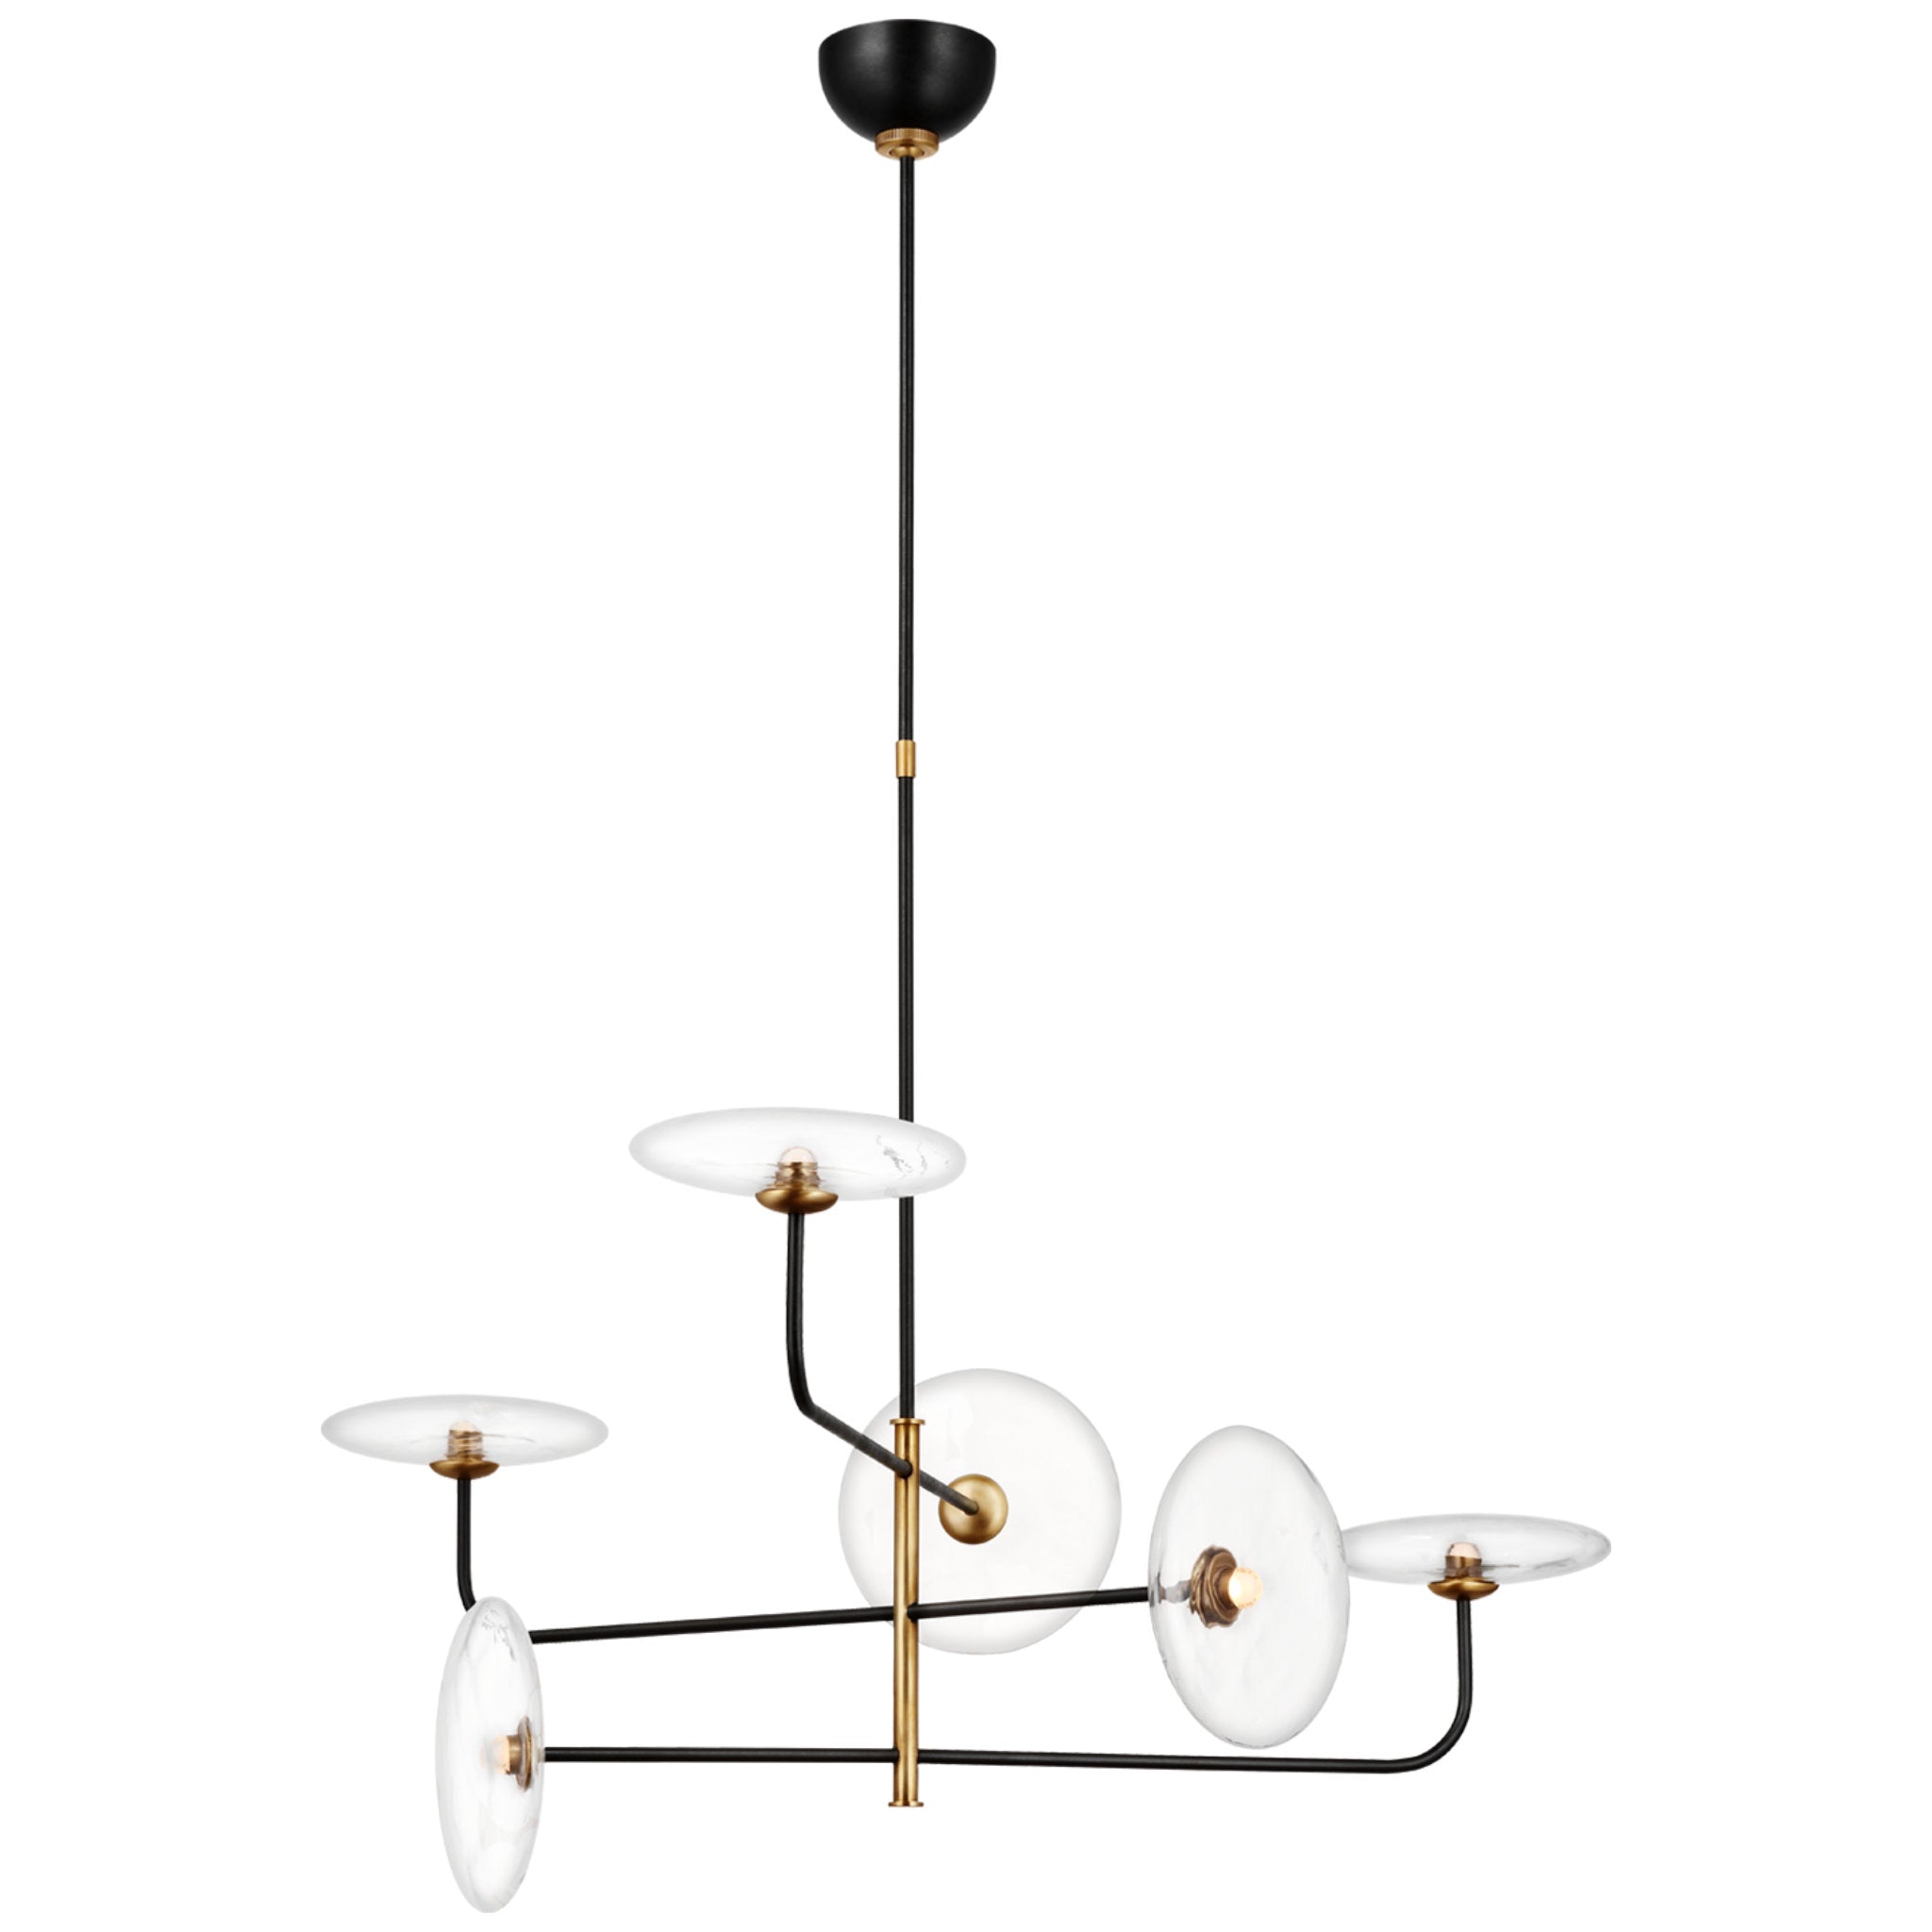 Ian K. Fowler Calvino Large Arched Chandelier in Aged Iron and Hand-Rubbed Antique Brass with Clear Glass